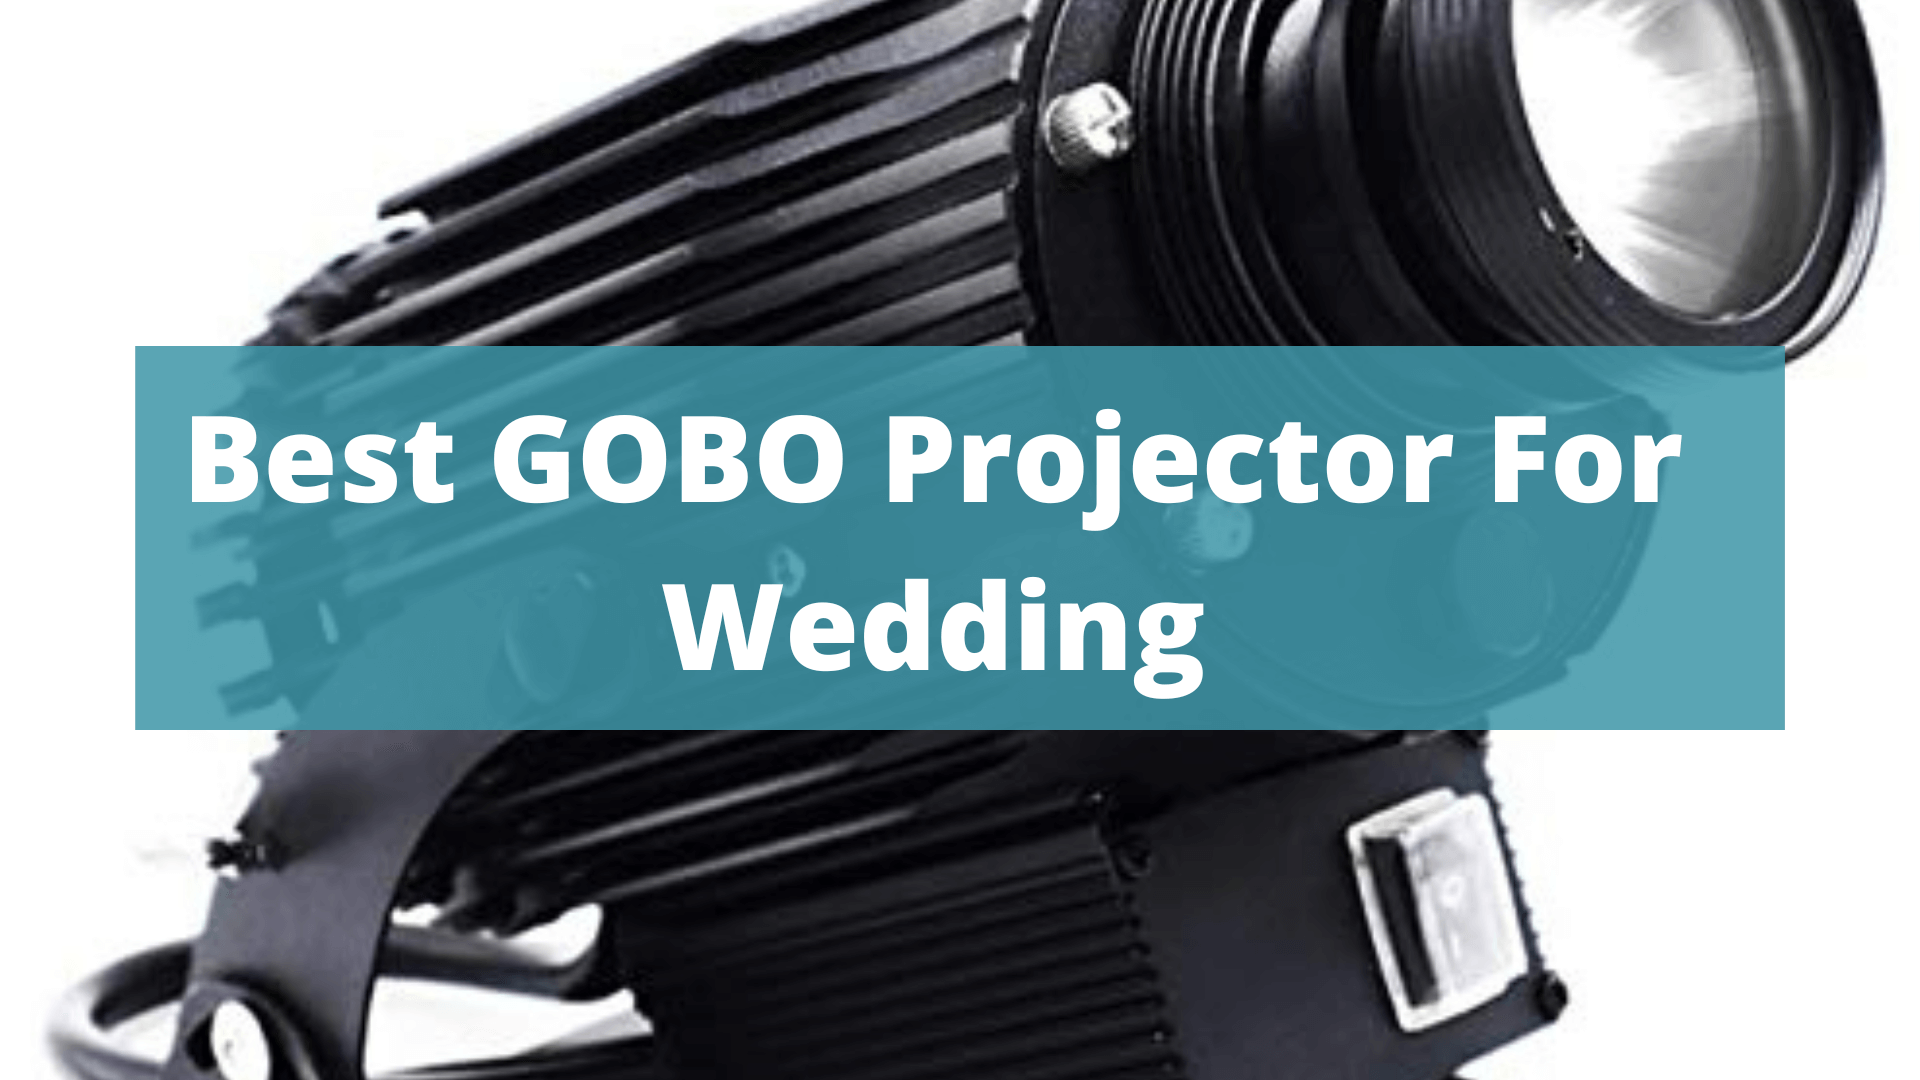 Best GOBO Projector For Wedding